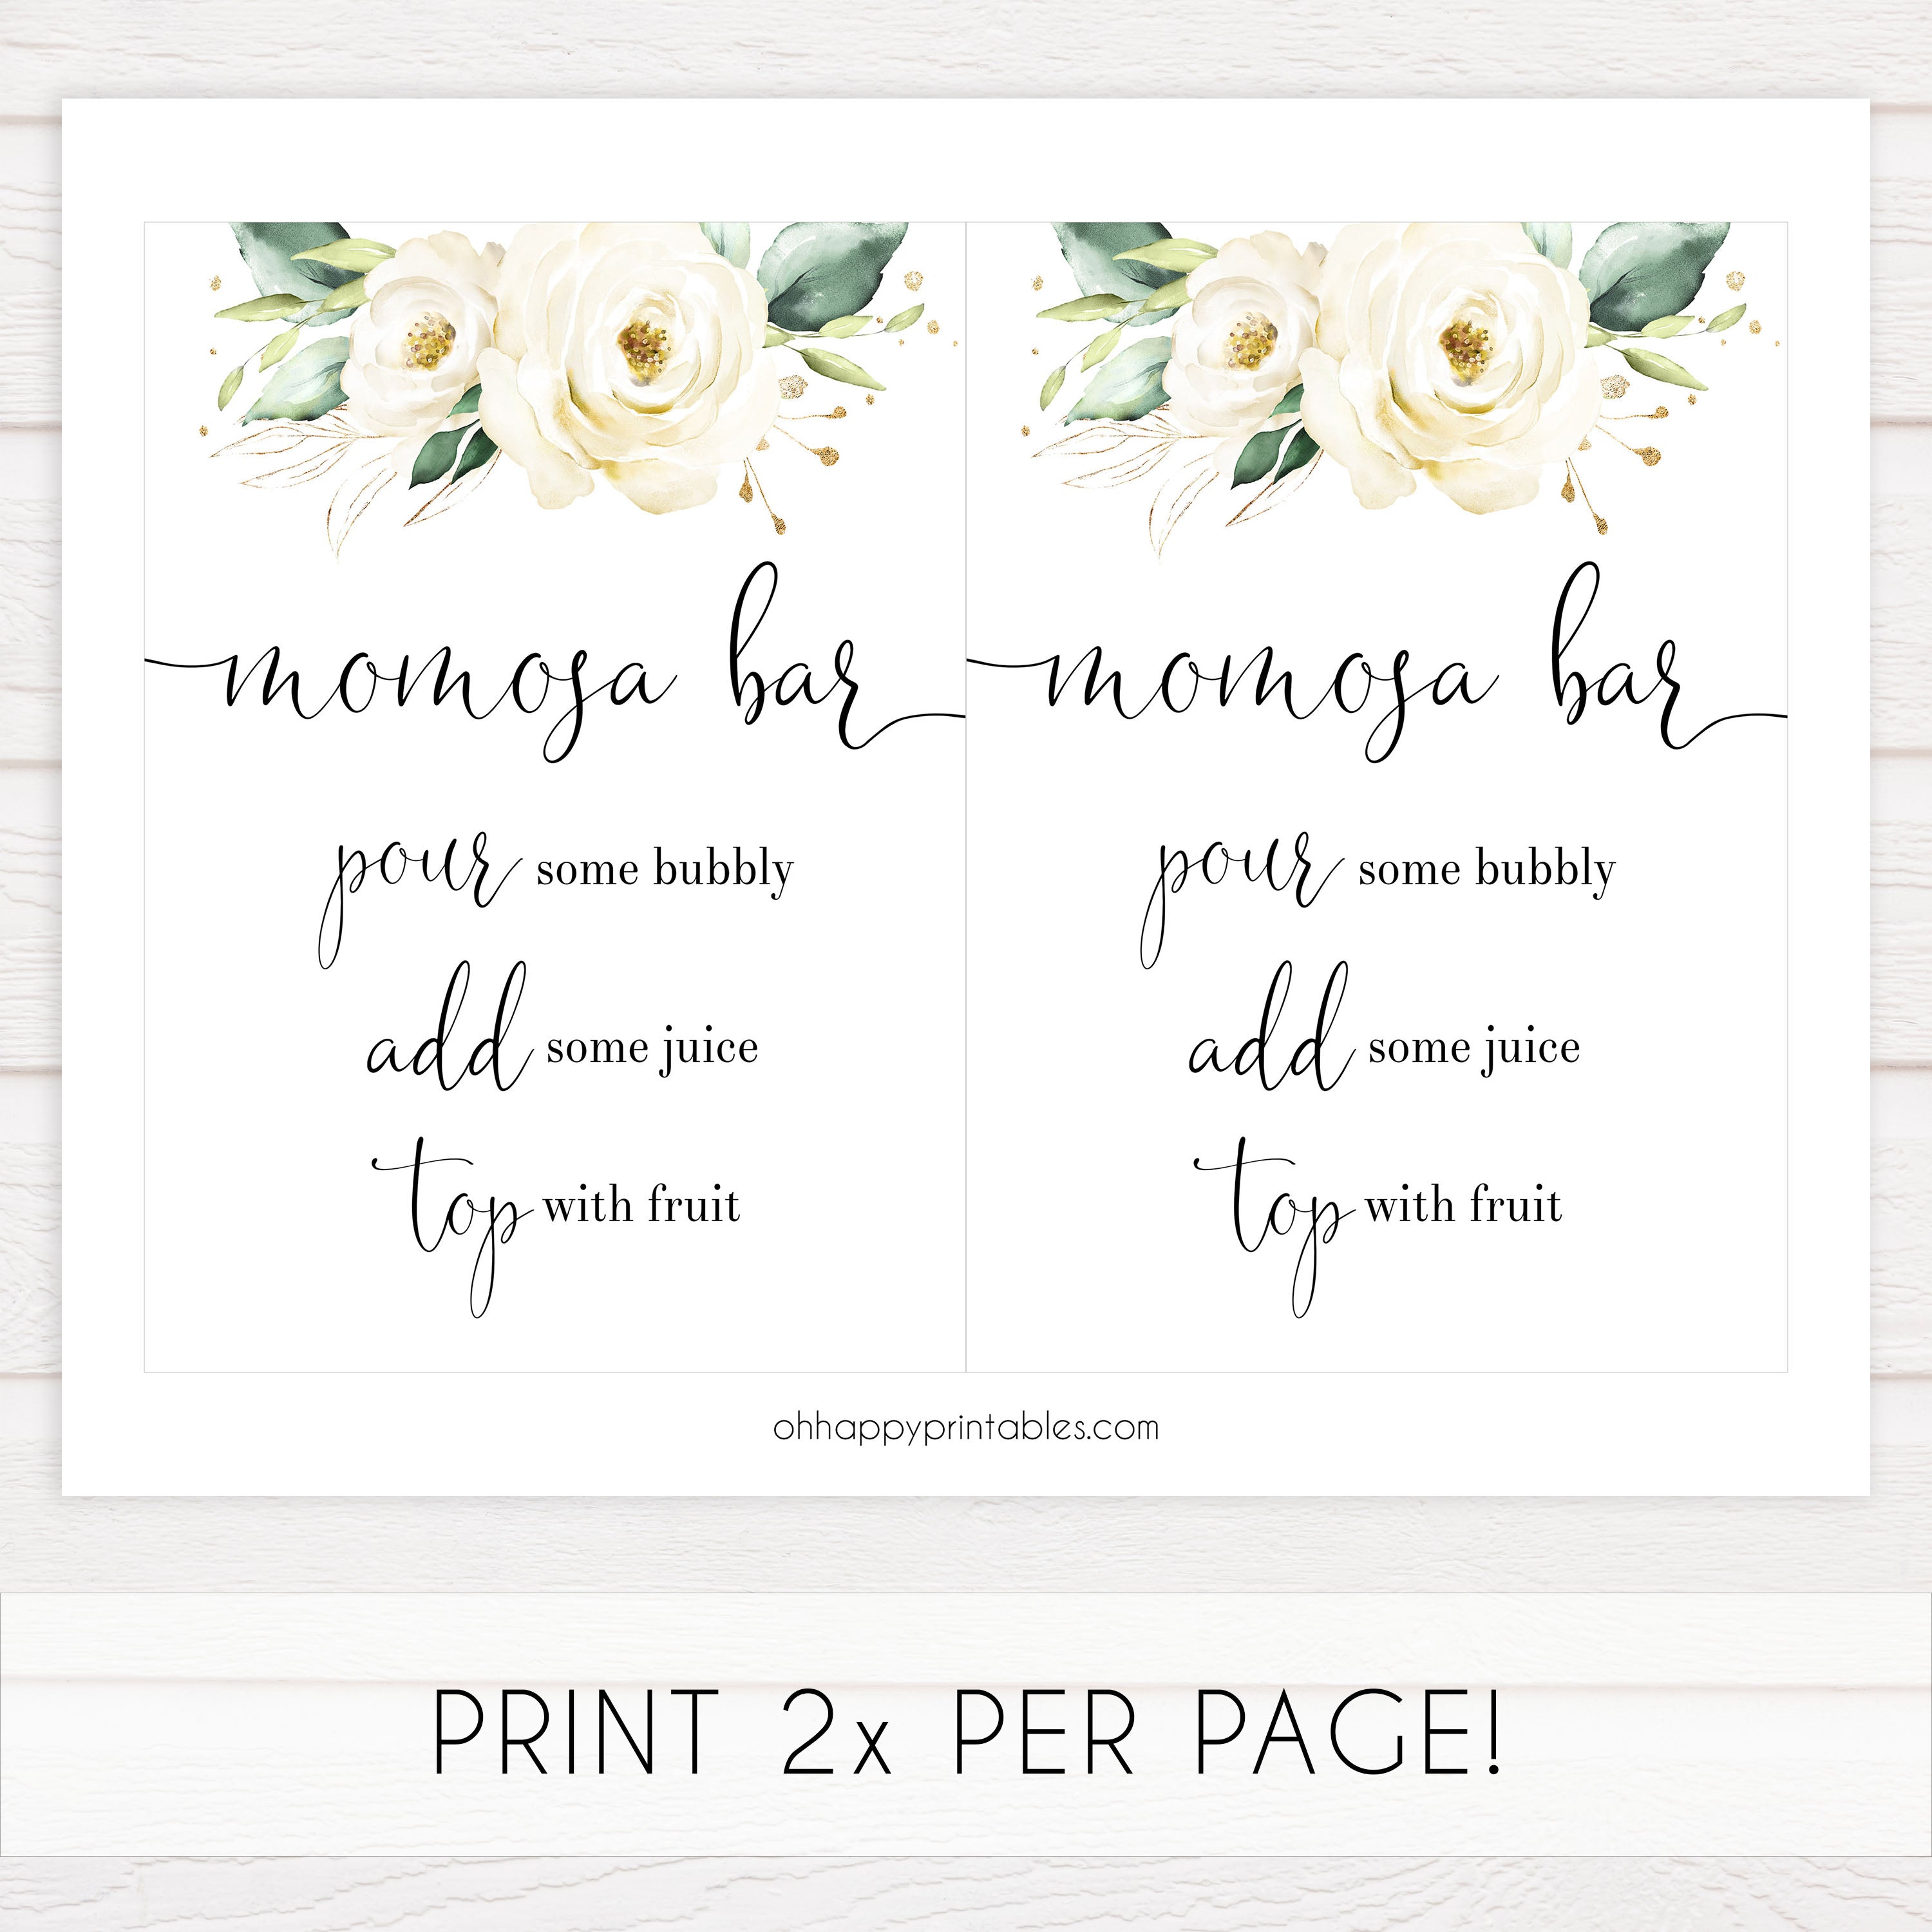 momosa baby shower table signs, Printable baby shower games, shite floral baby games, baby shower games, fun baby shower ideas, top baby shower ideas, floral baby shower, baby shower games, fun floral baby shower ideas